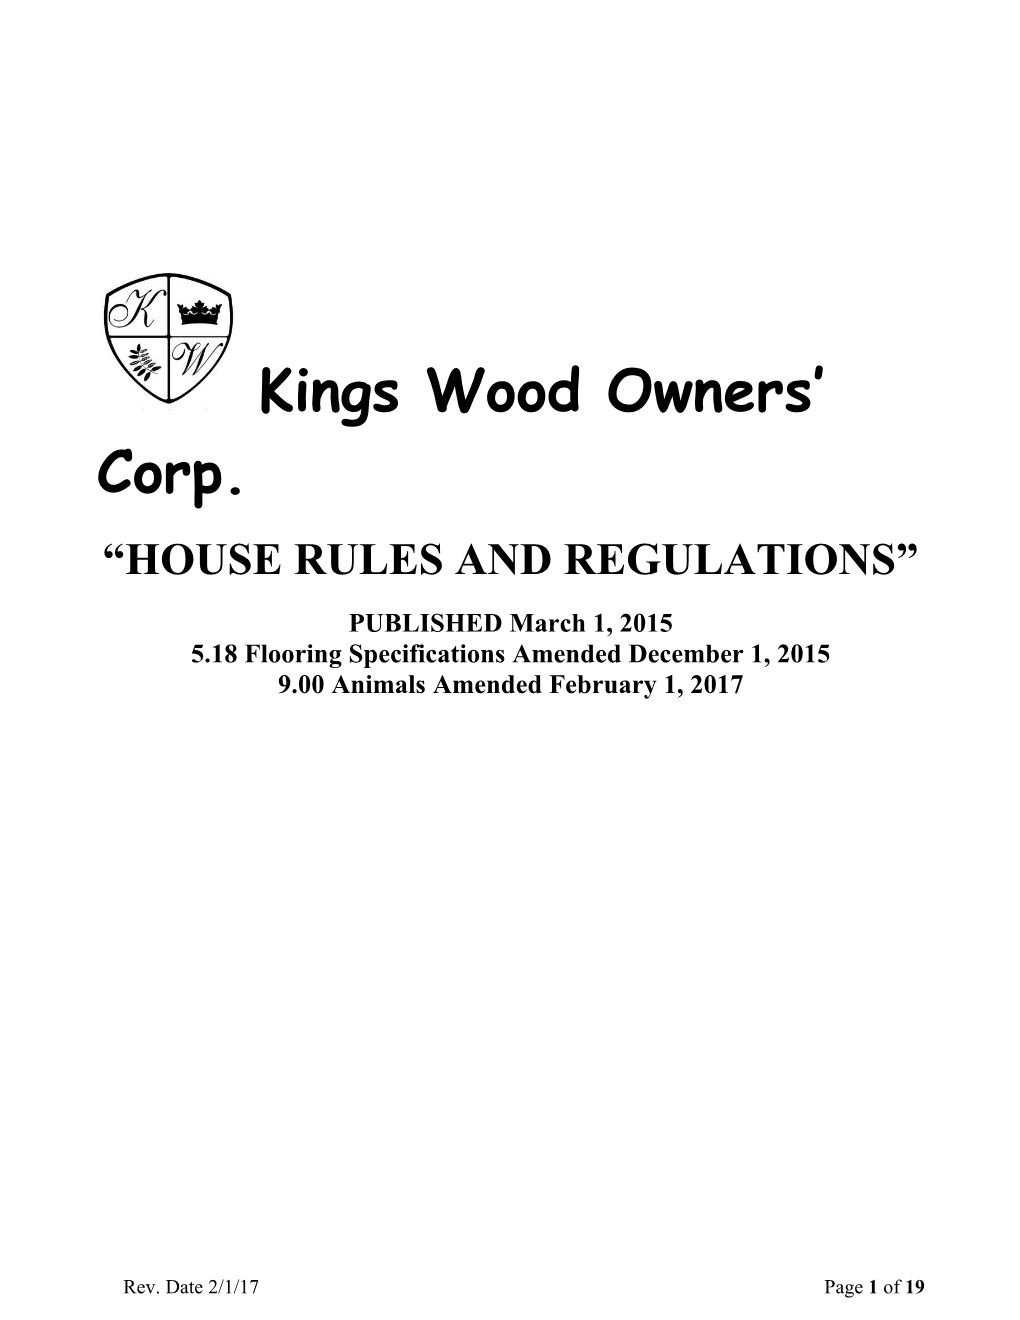 Kings Wood Owners Corporation